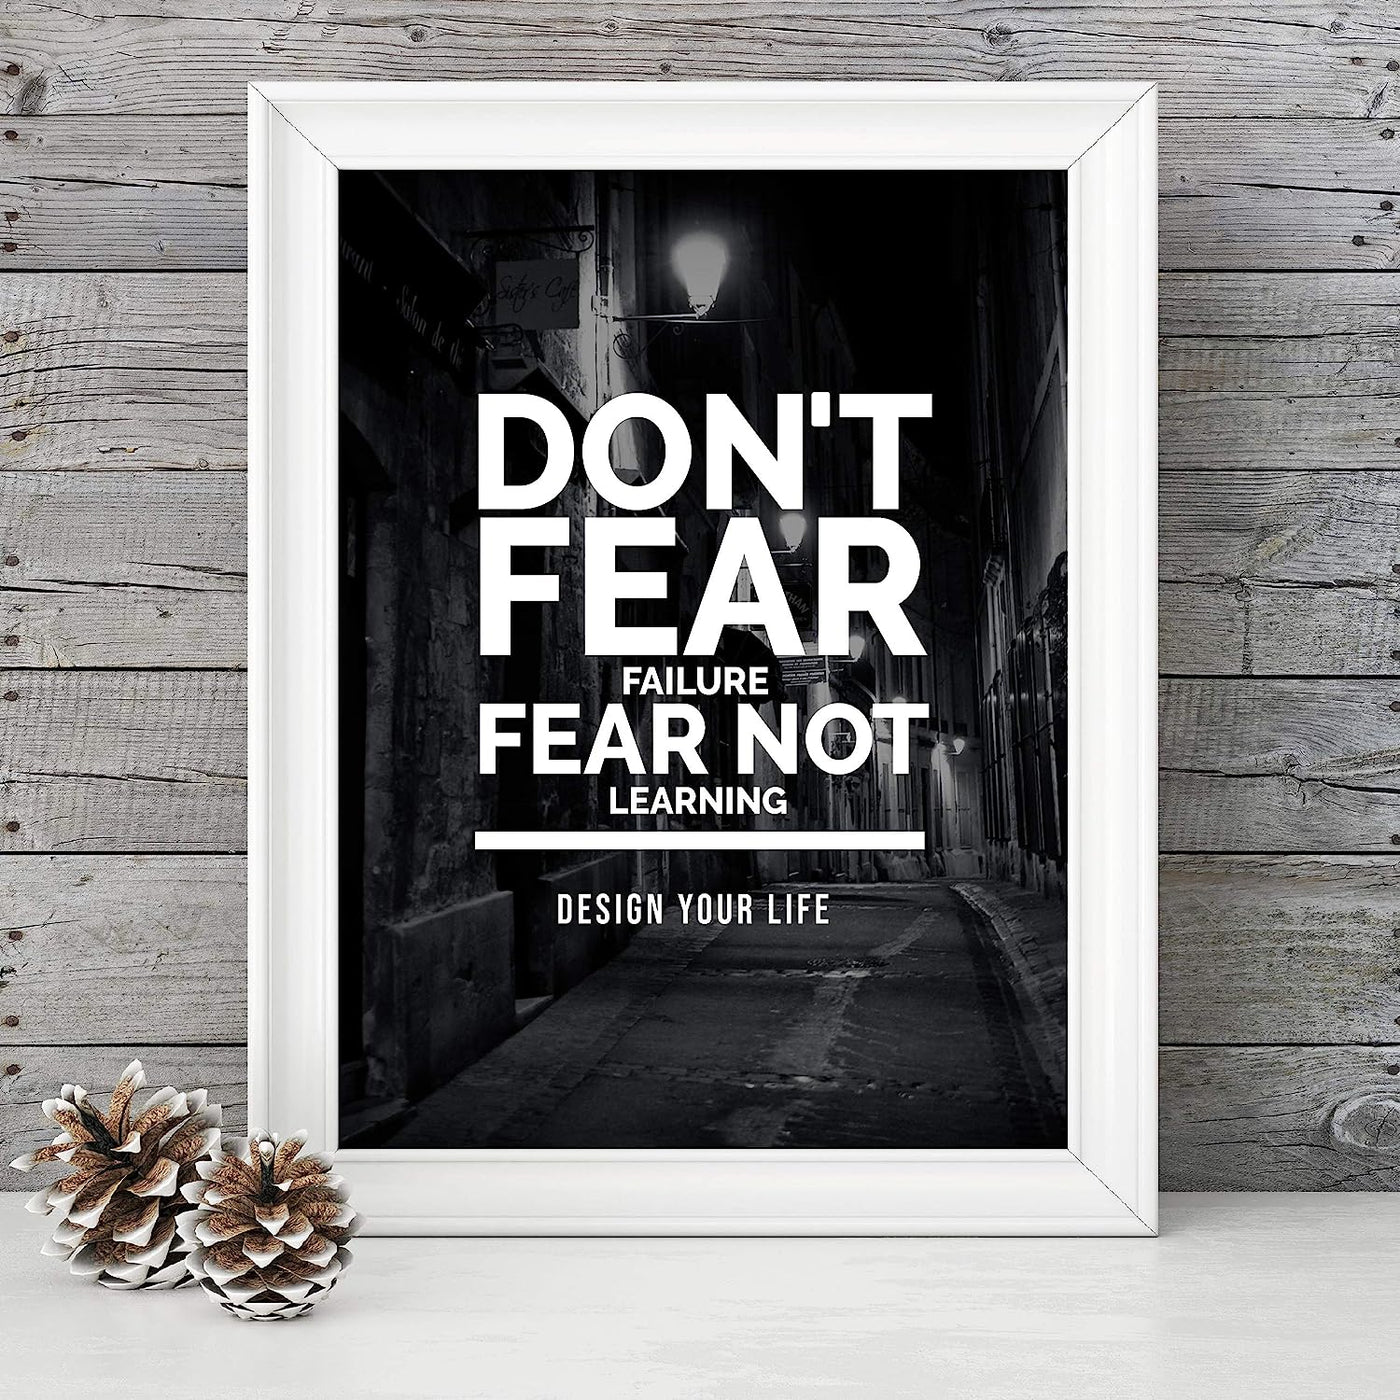 Don't Fear Failure-Fear Not Learning Motivational Quotes Wall Art -8 x 10" Typographic Poster Print-Ready to Frame. Inspirational Home-Office-School-Gym-Locker Room Decor. Great Gift of Motivation!